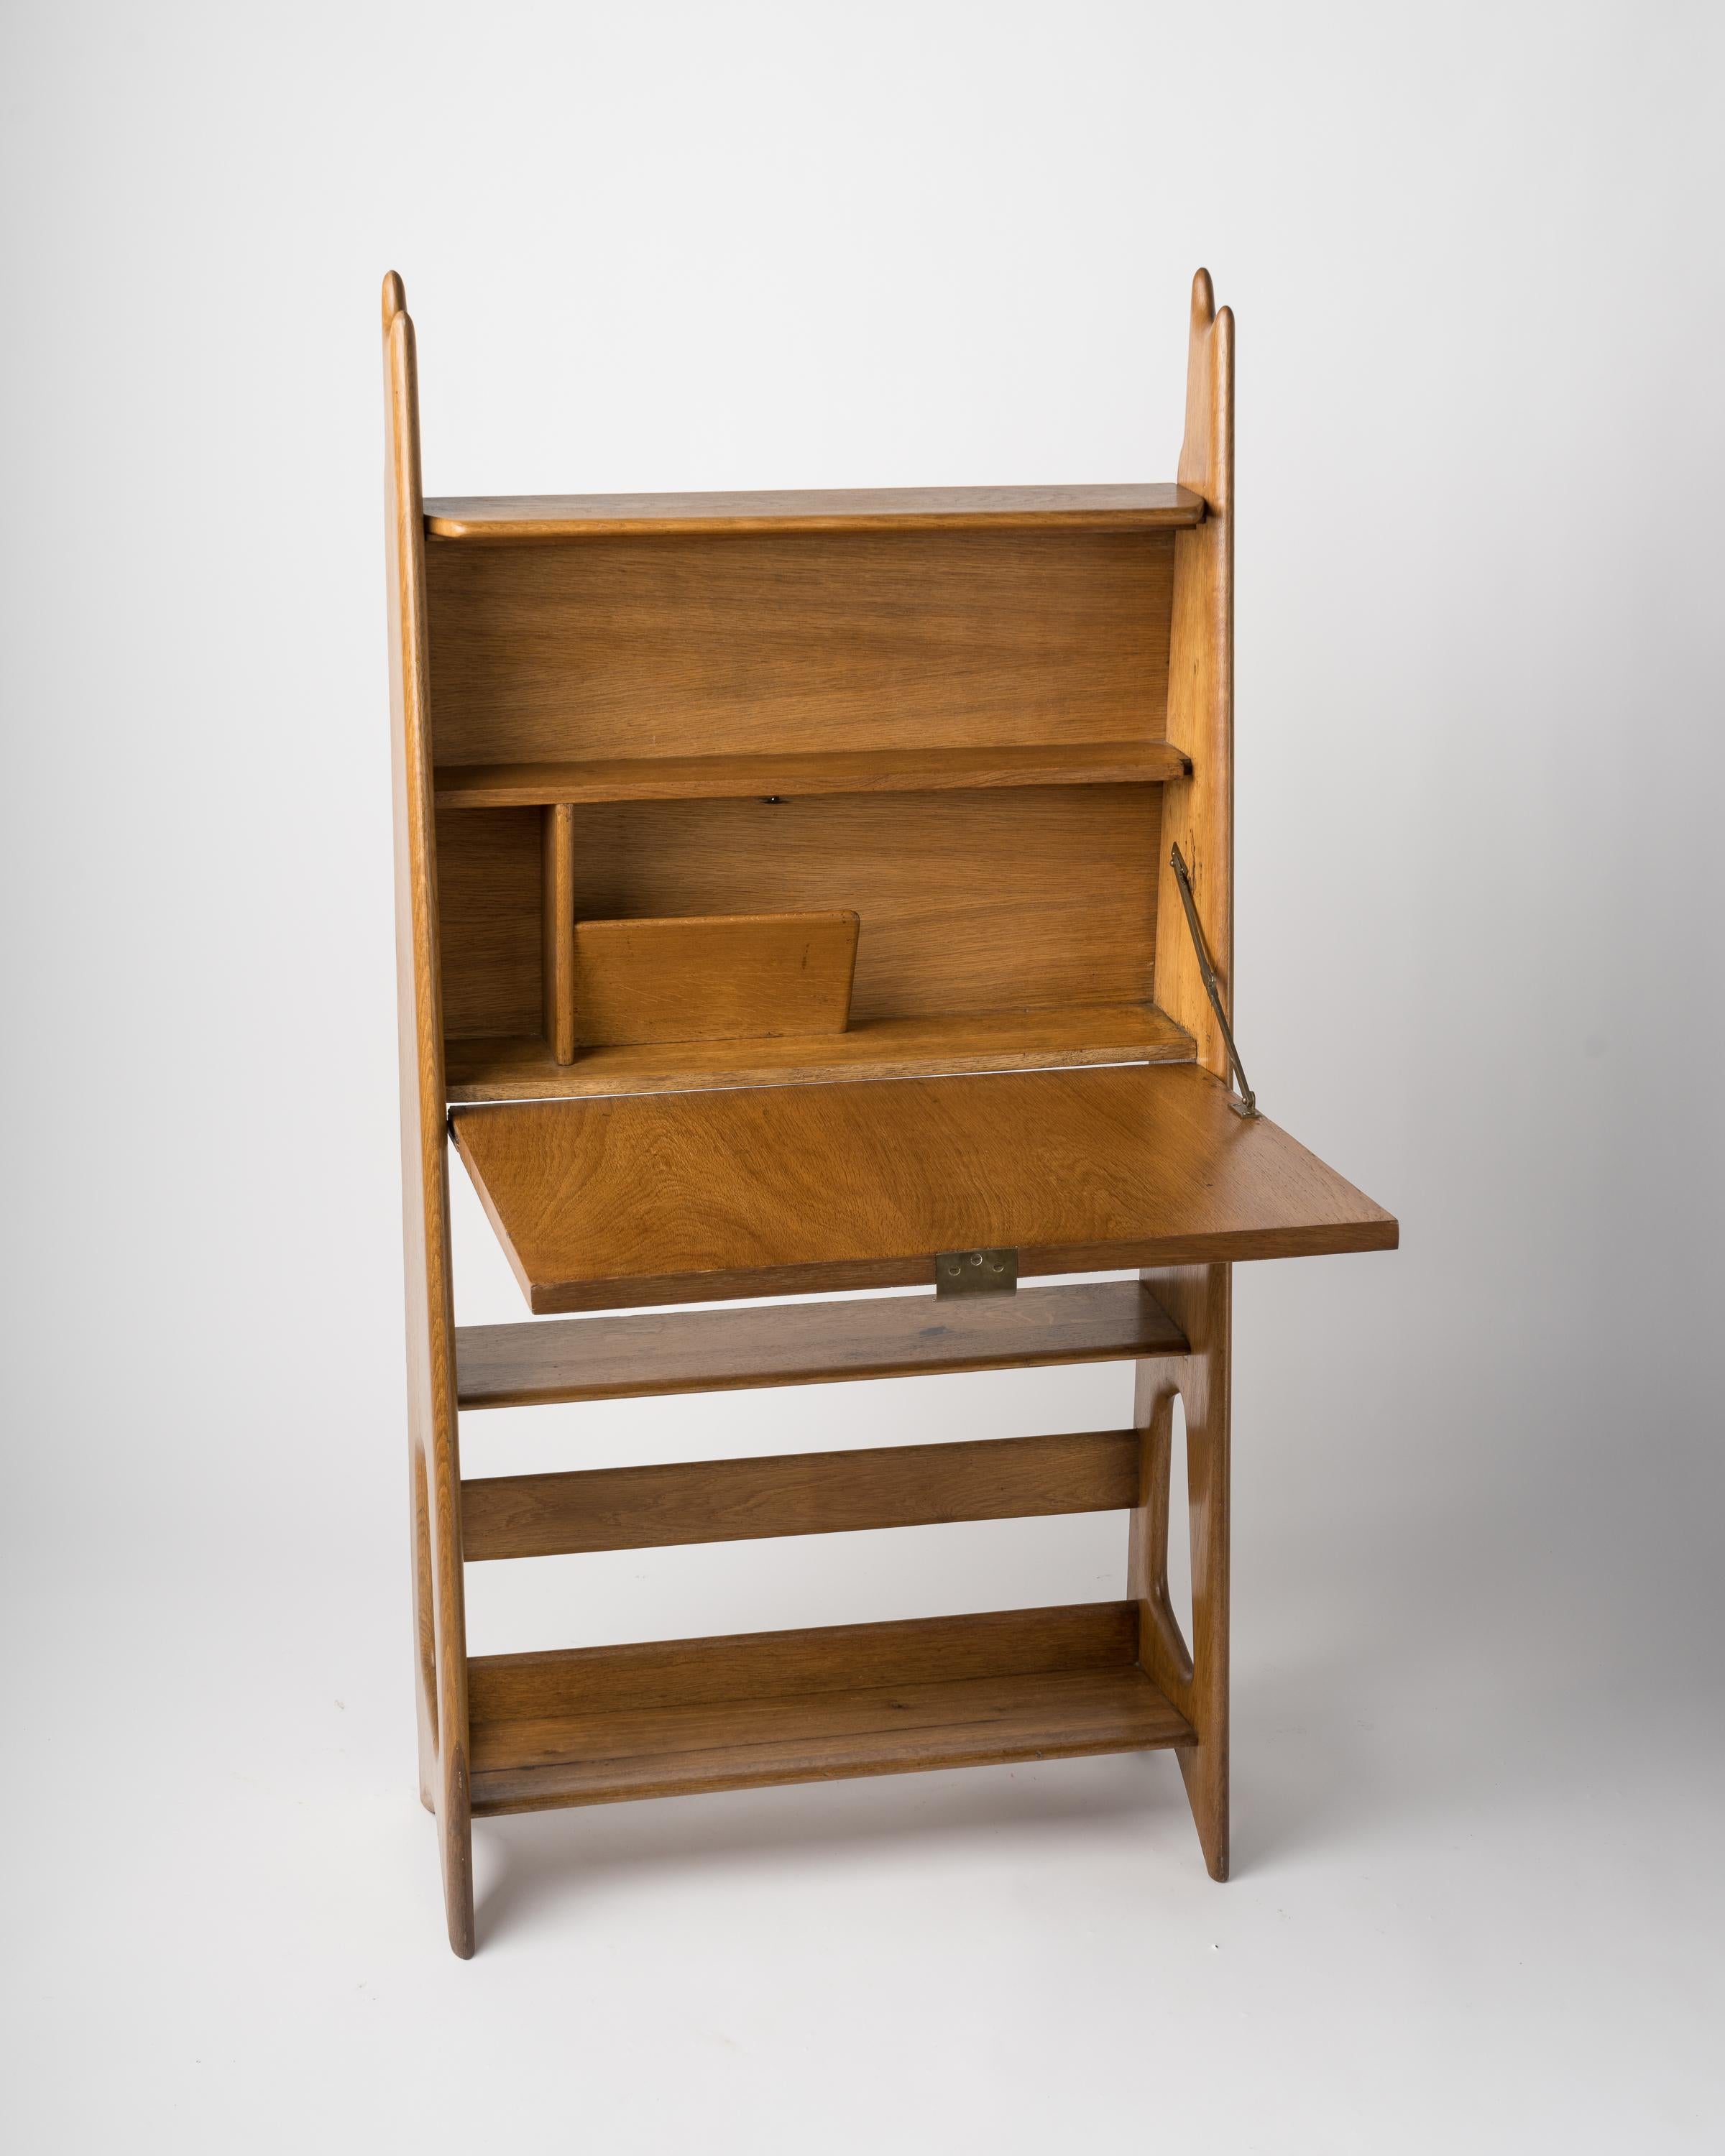 French reconstruction designer Pierre Cruège's forme libre masterpiece bureau with abattant.
Rare natural oak version
Brass details
Inside the desk compartment, a letter rack and a shelf can be found.
In good vintage condition
This 